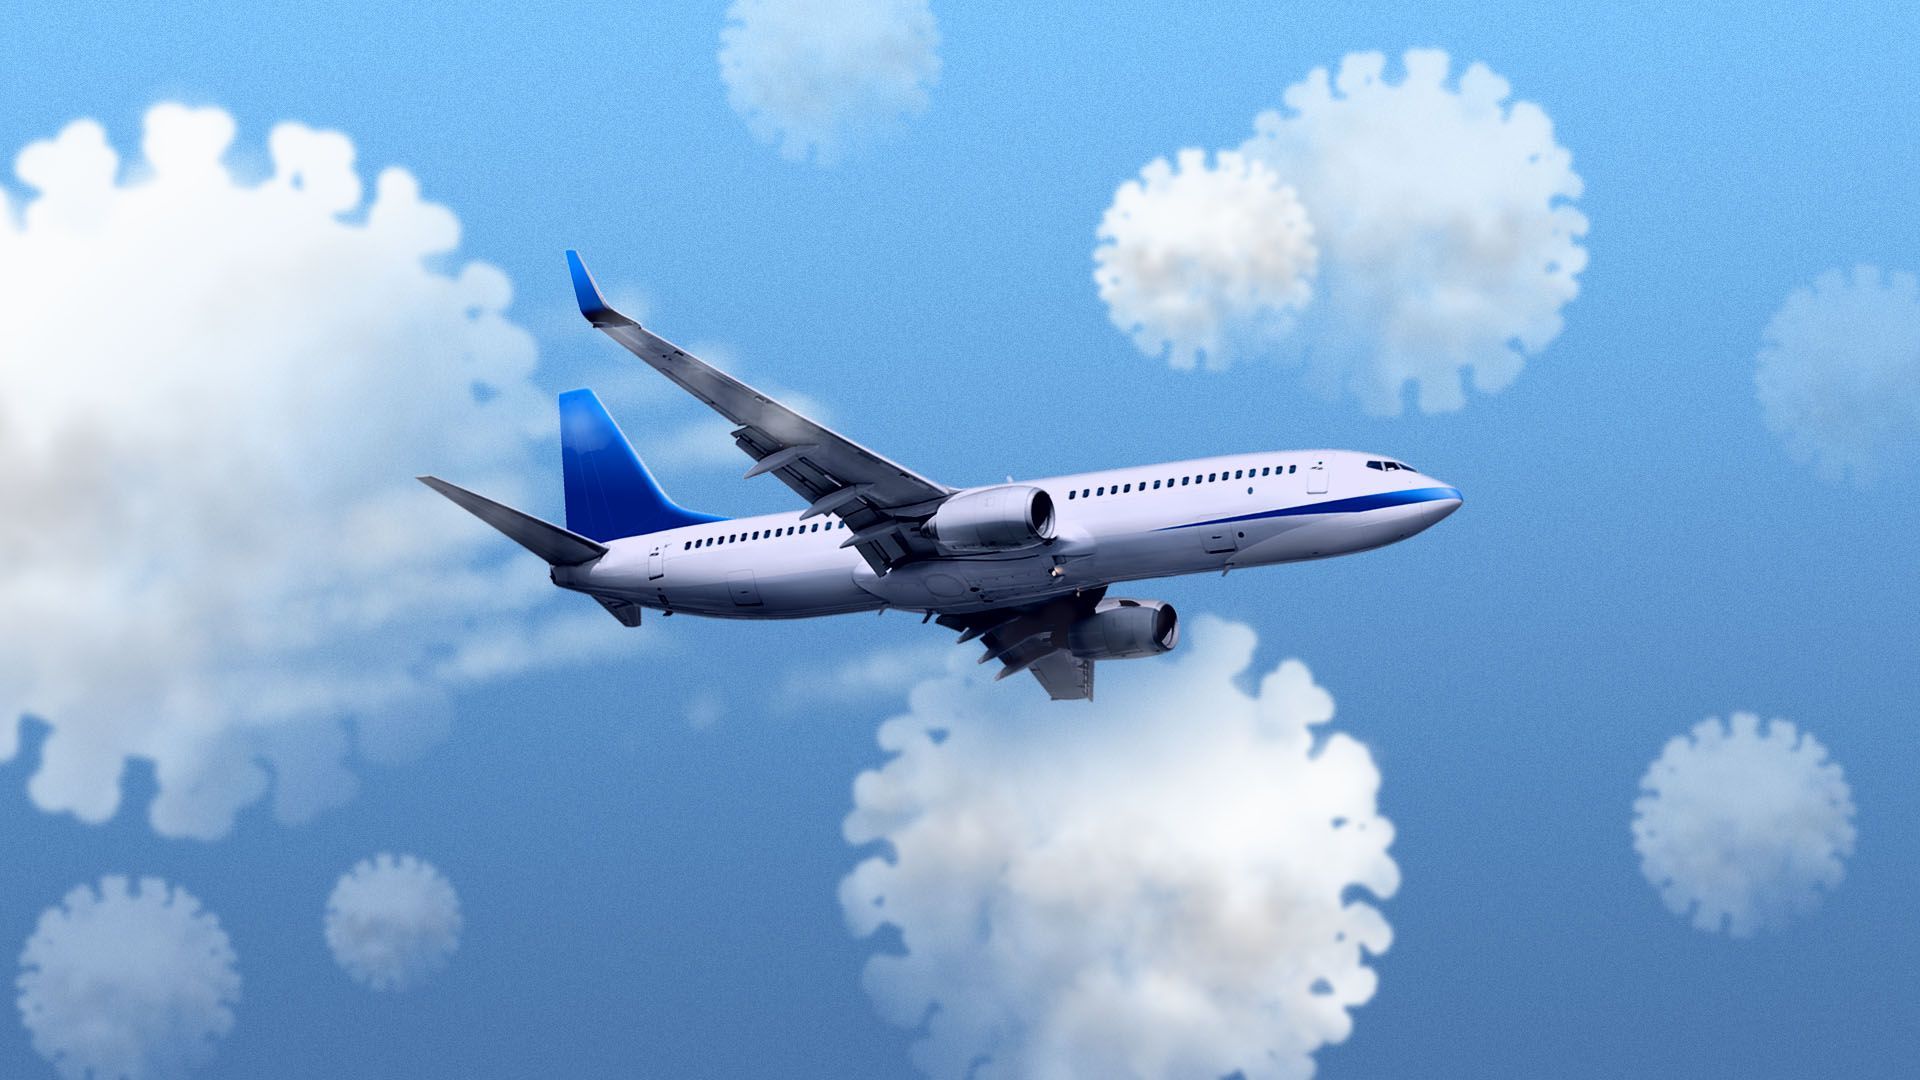 Illustration of a plane flying through clouds shaped like viruses.